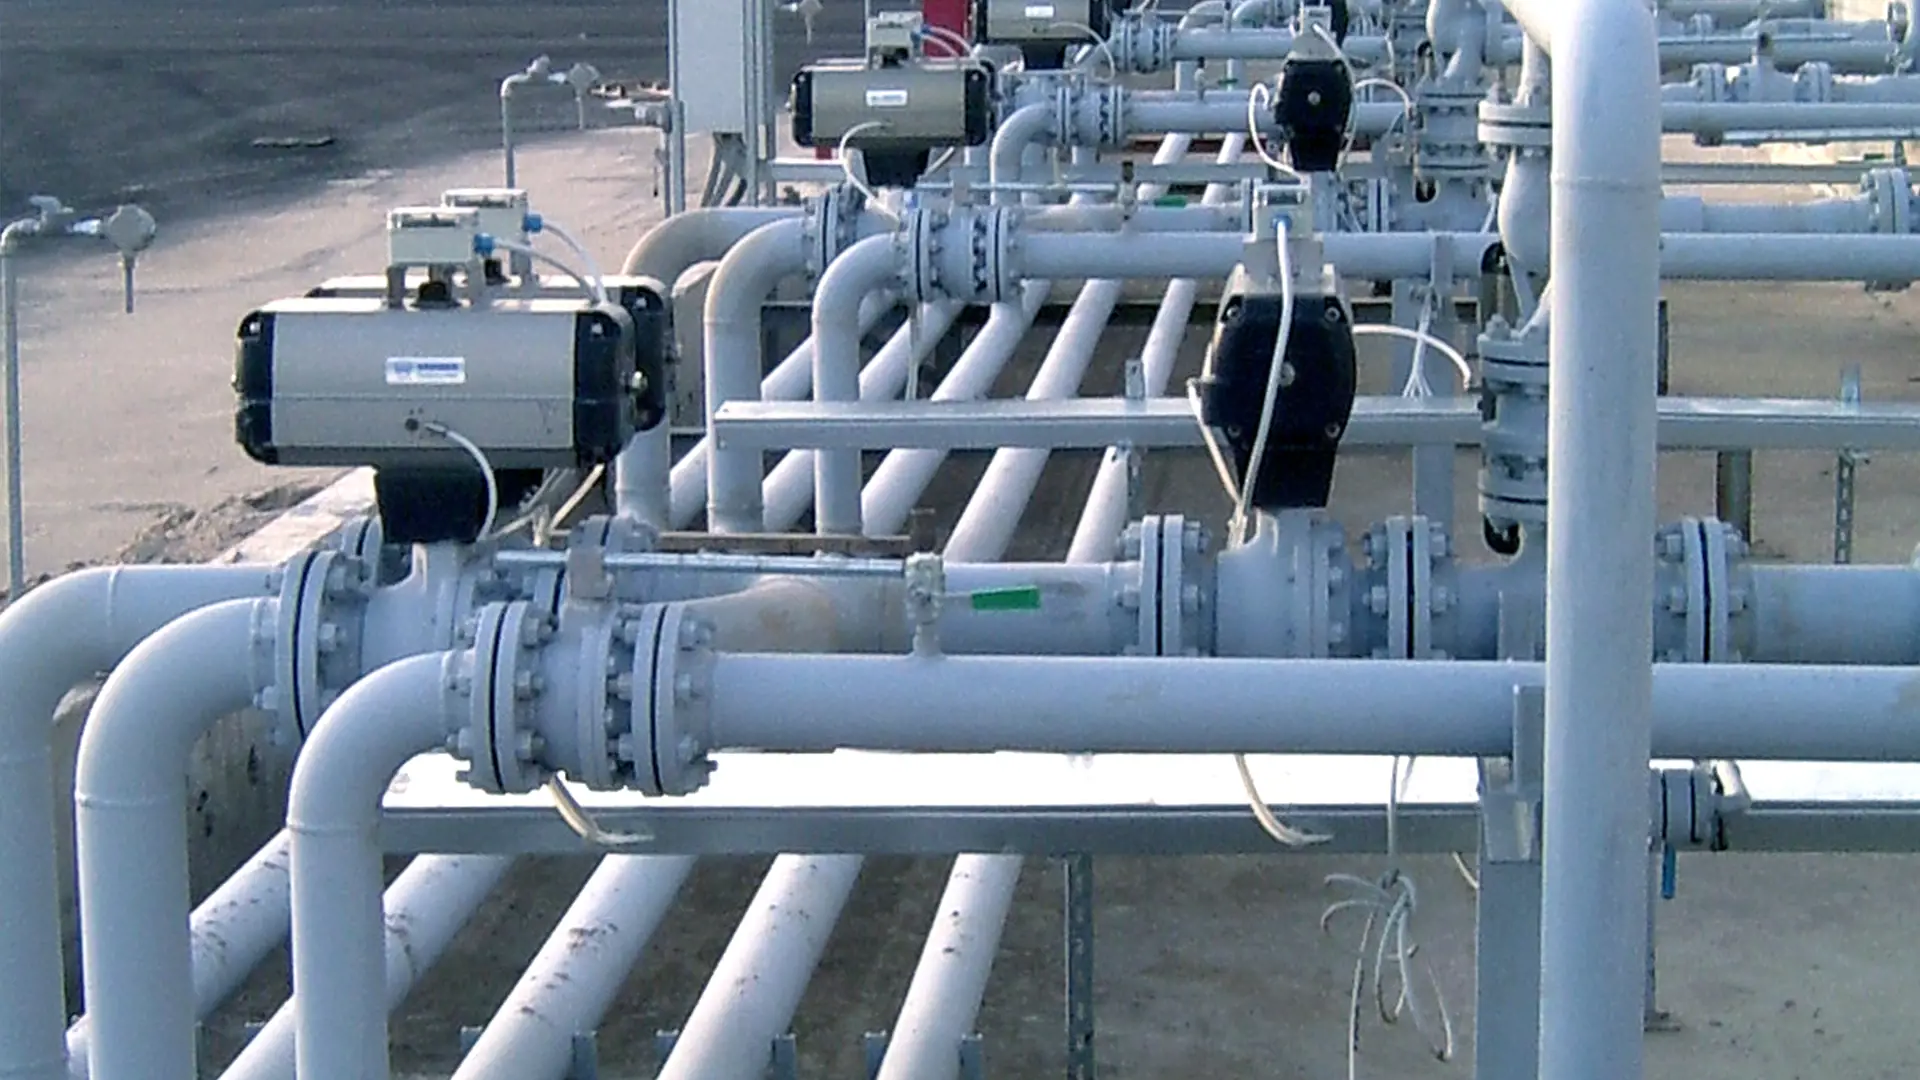 image of an LPG piping systems with white pipelines